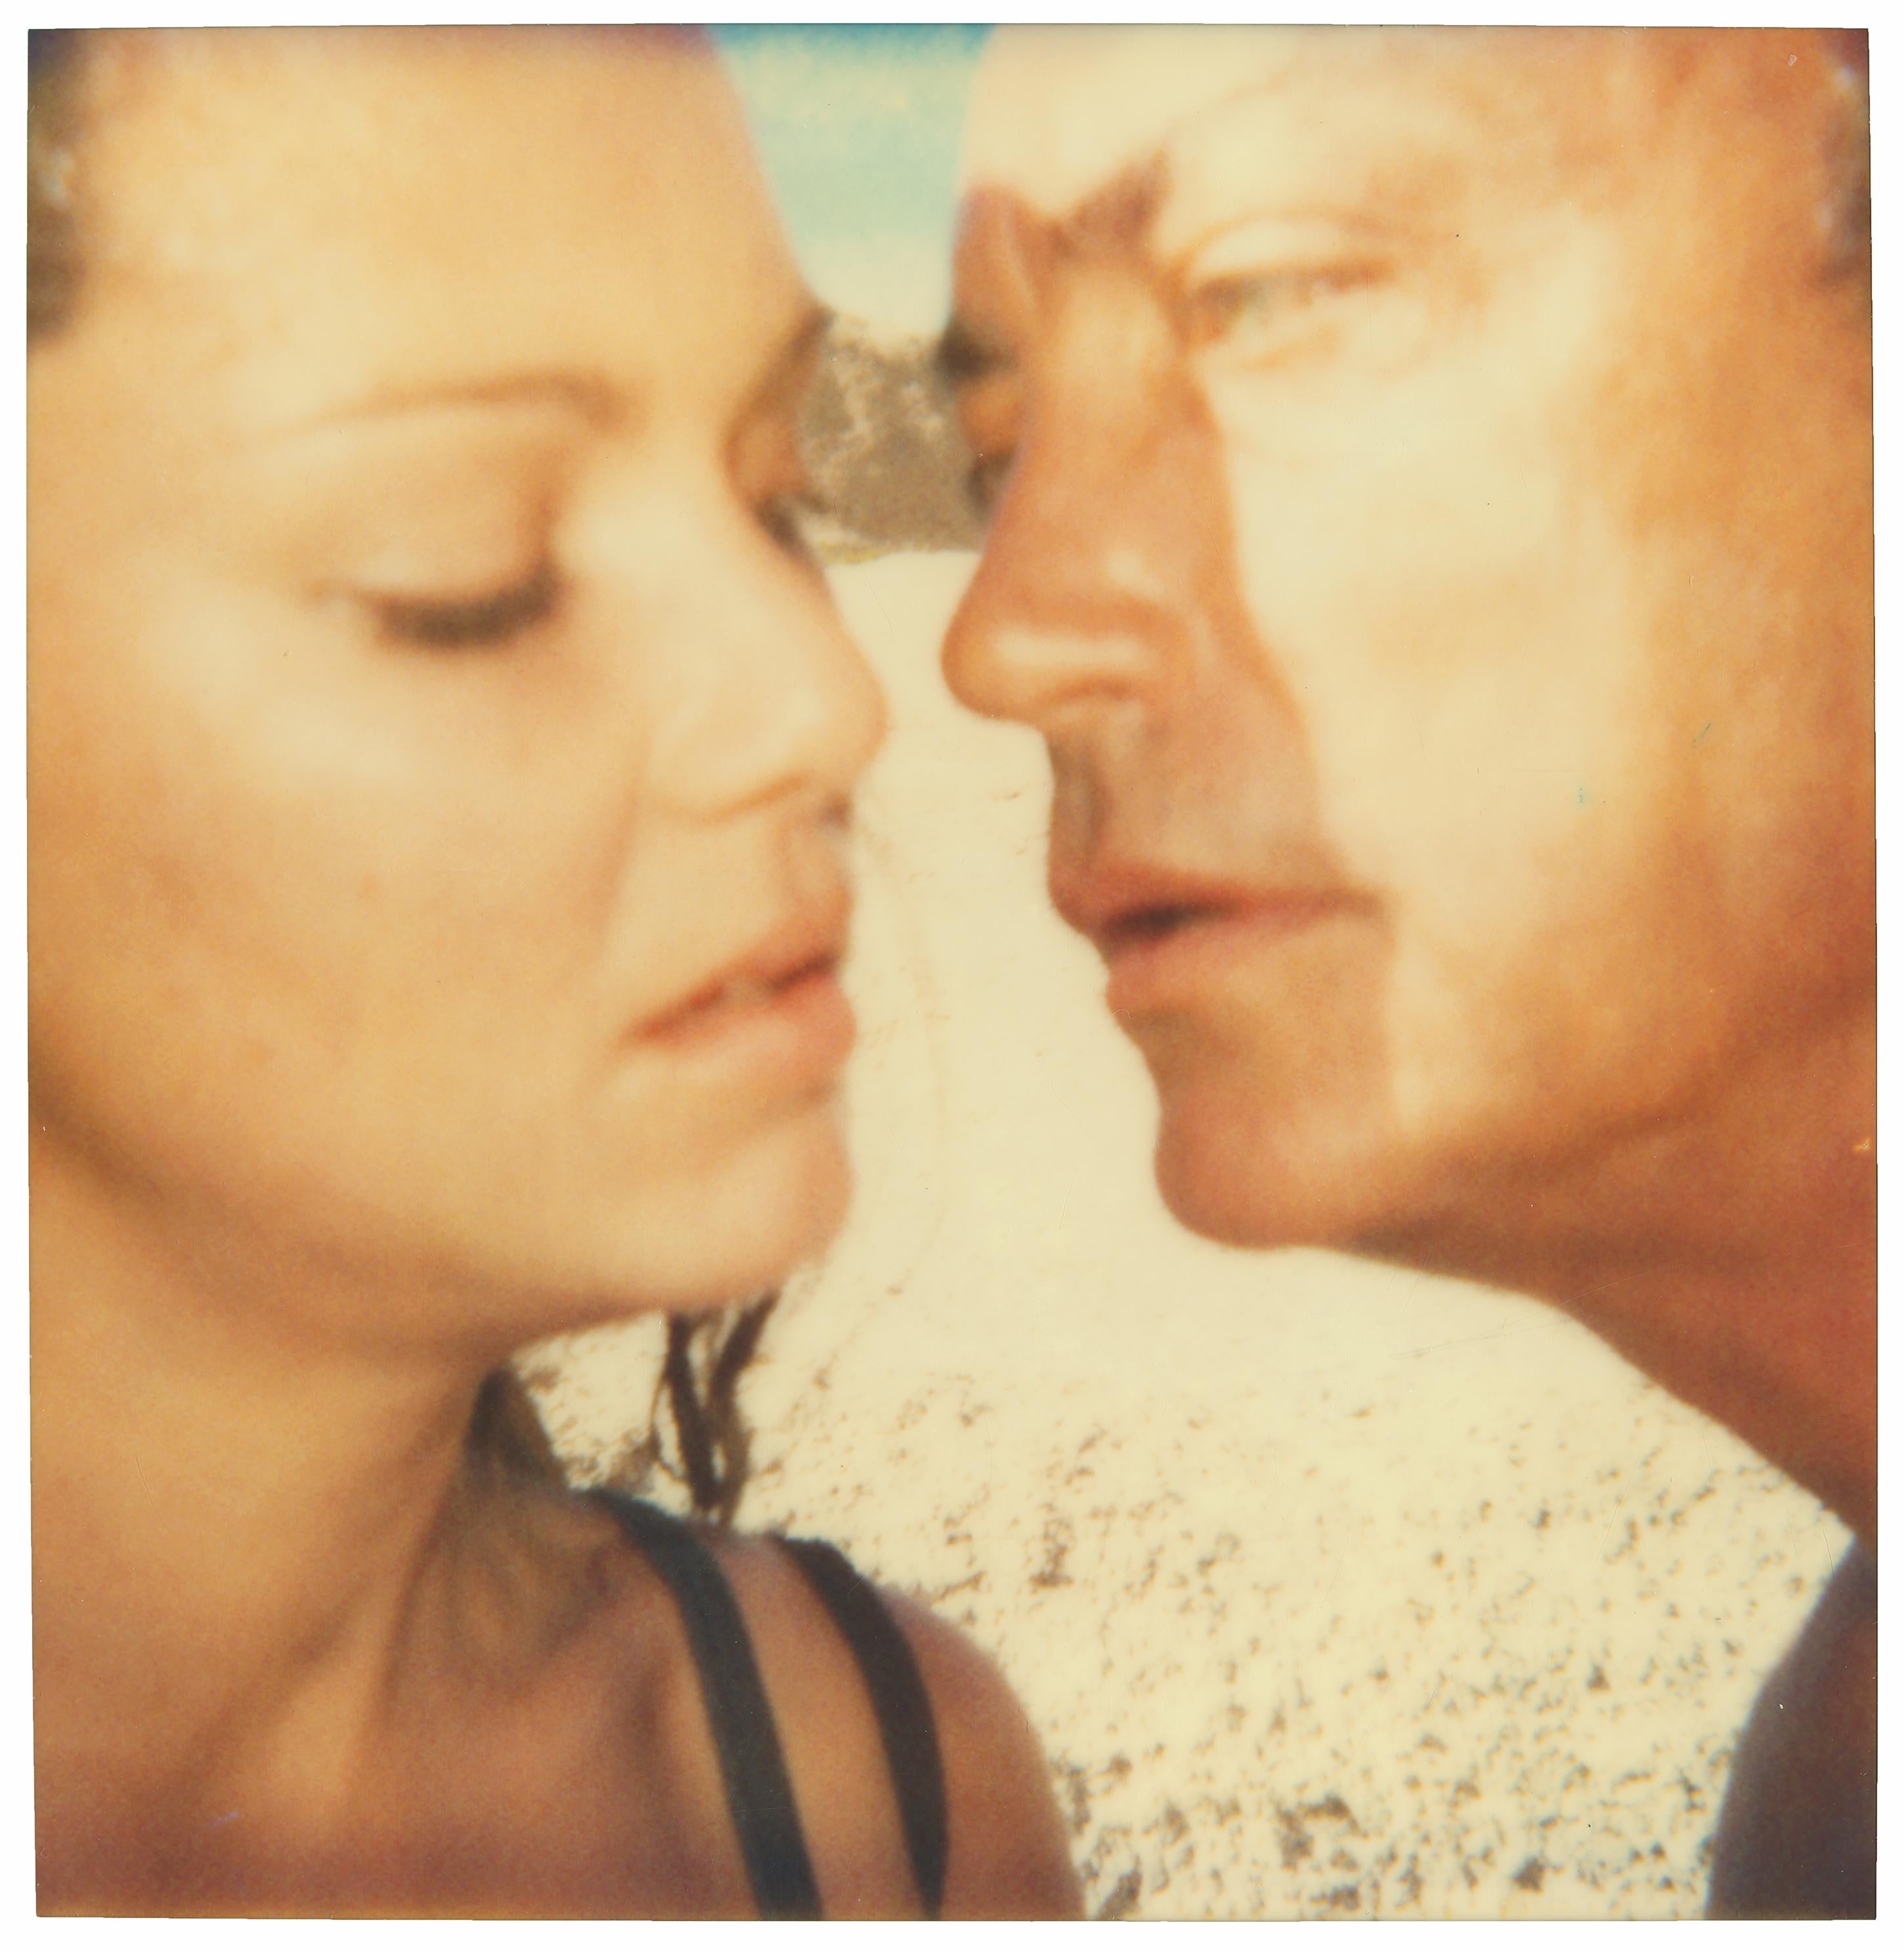 Stefanie Schneider Color Photograph - Untitled 02 (Immaculate Springs -feature film) with Udo Kier and Jacinda Barrett